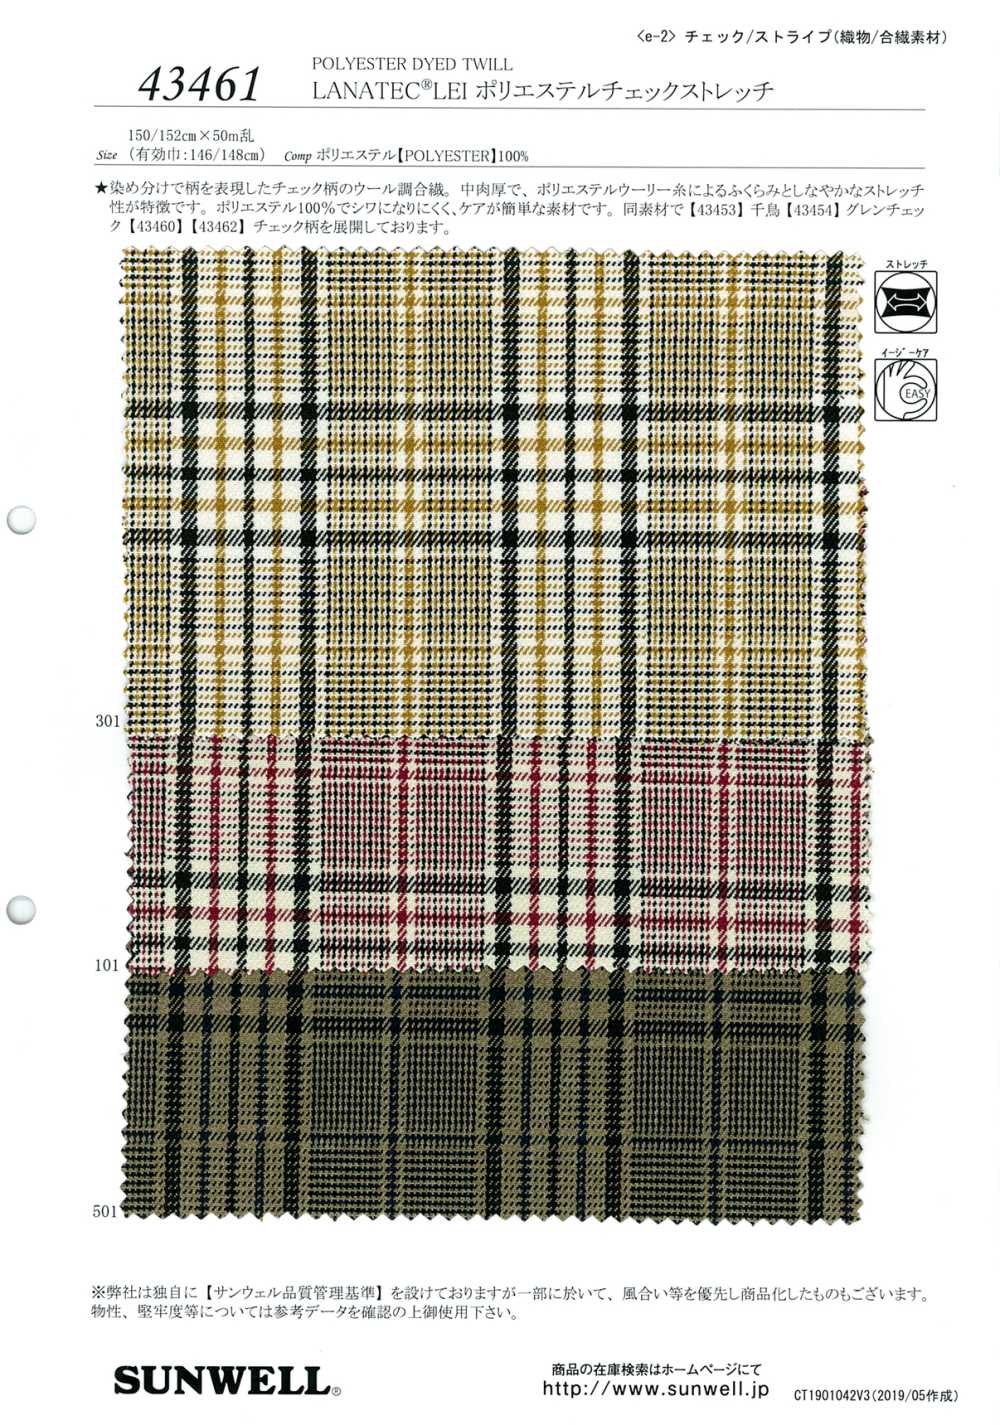 43461 [OUTLET] LANATEC (R) LEI Polyester Check Stretch[Fabrication De Textile] SUNWELL